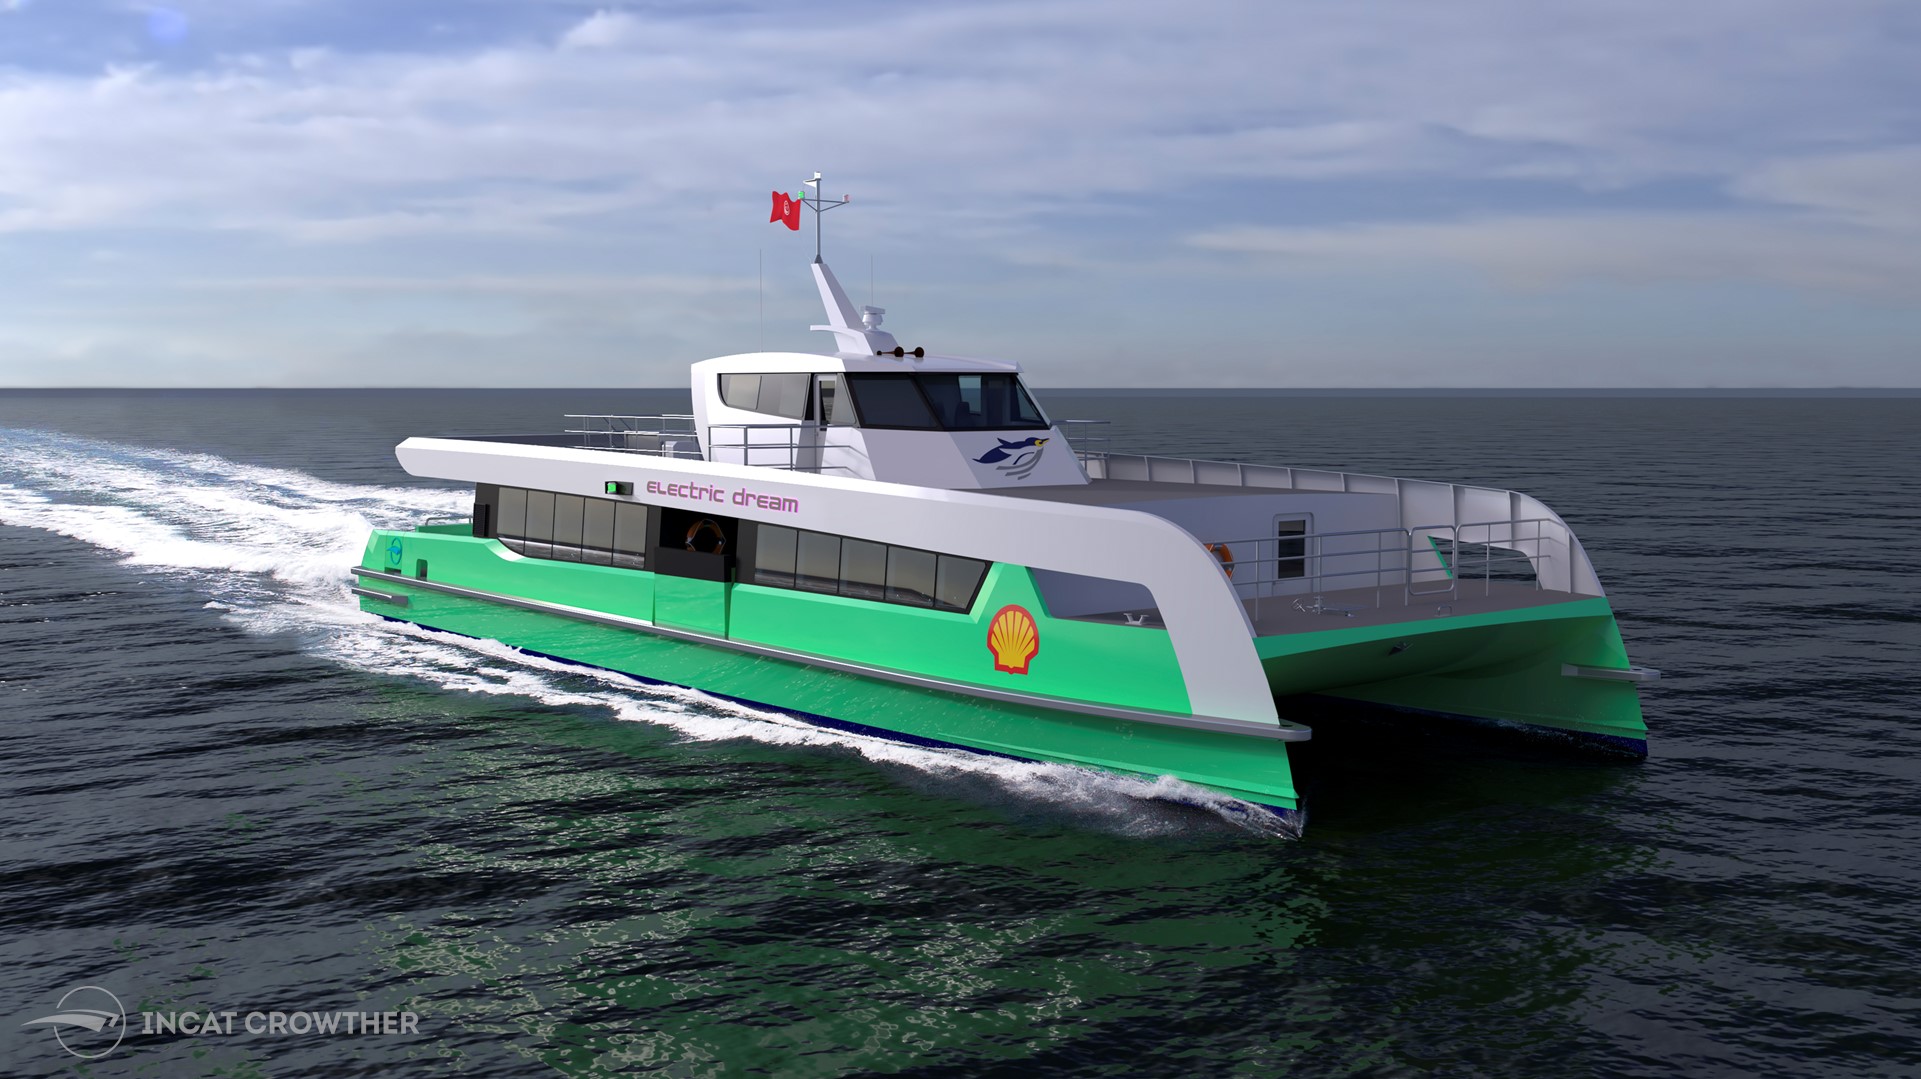 Singapore’s First Electric Ferries Set Sail for Shell Island Refinery